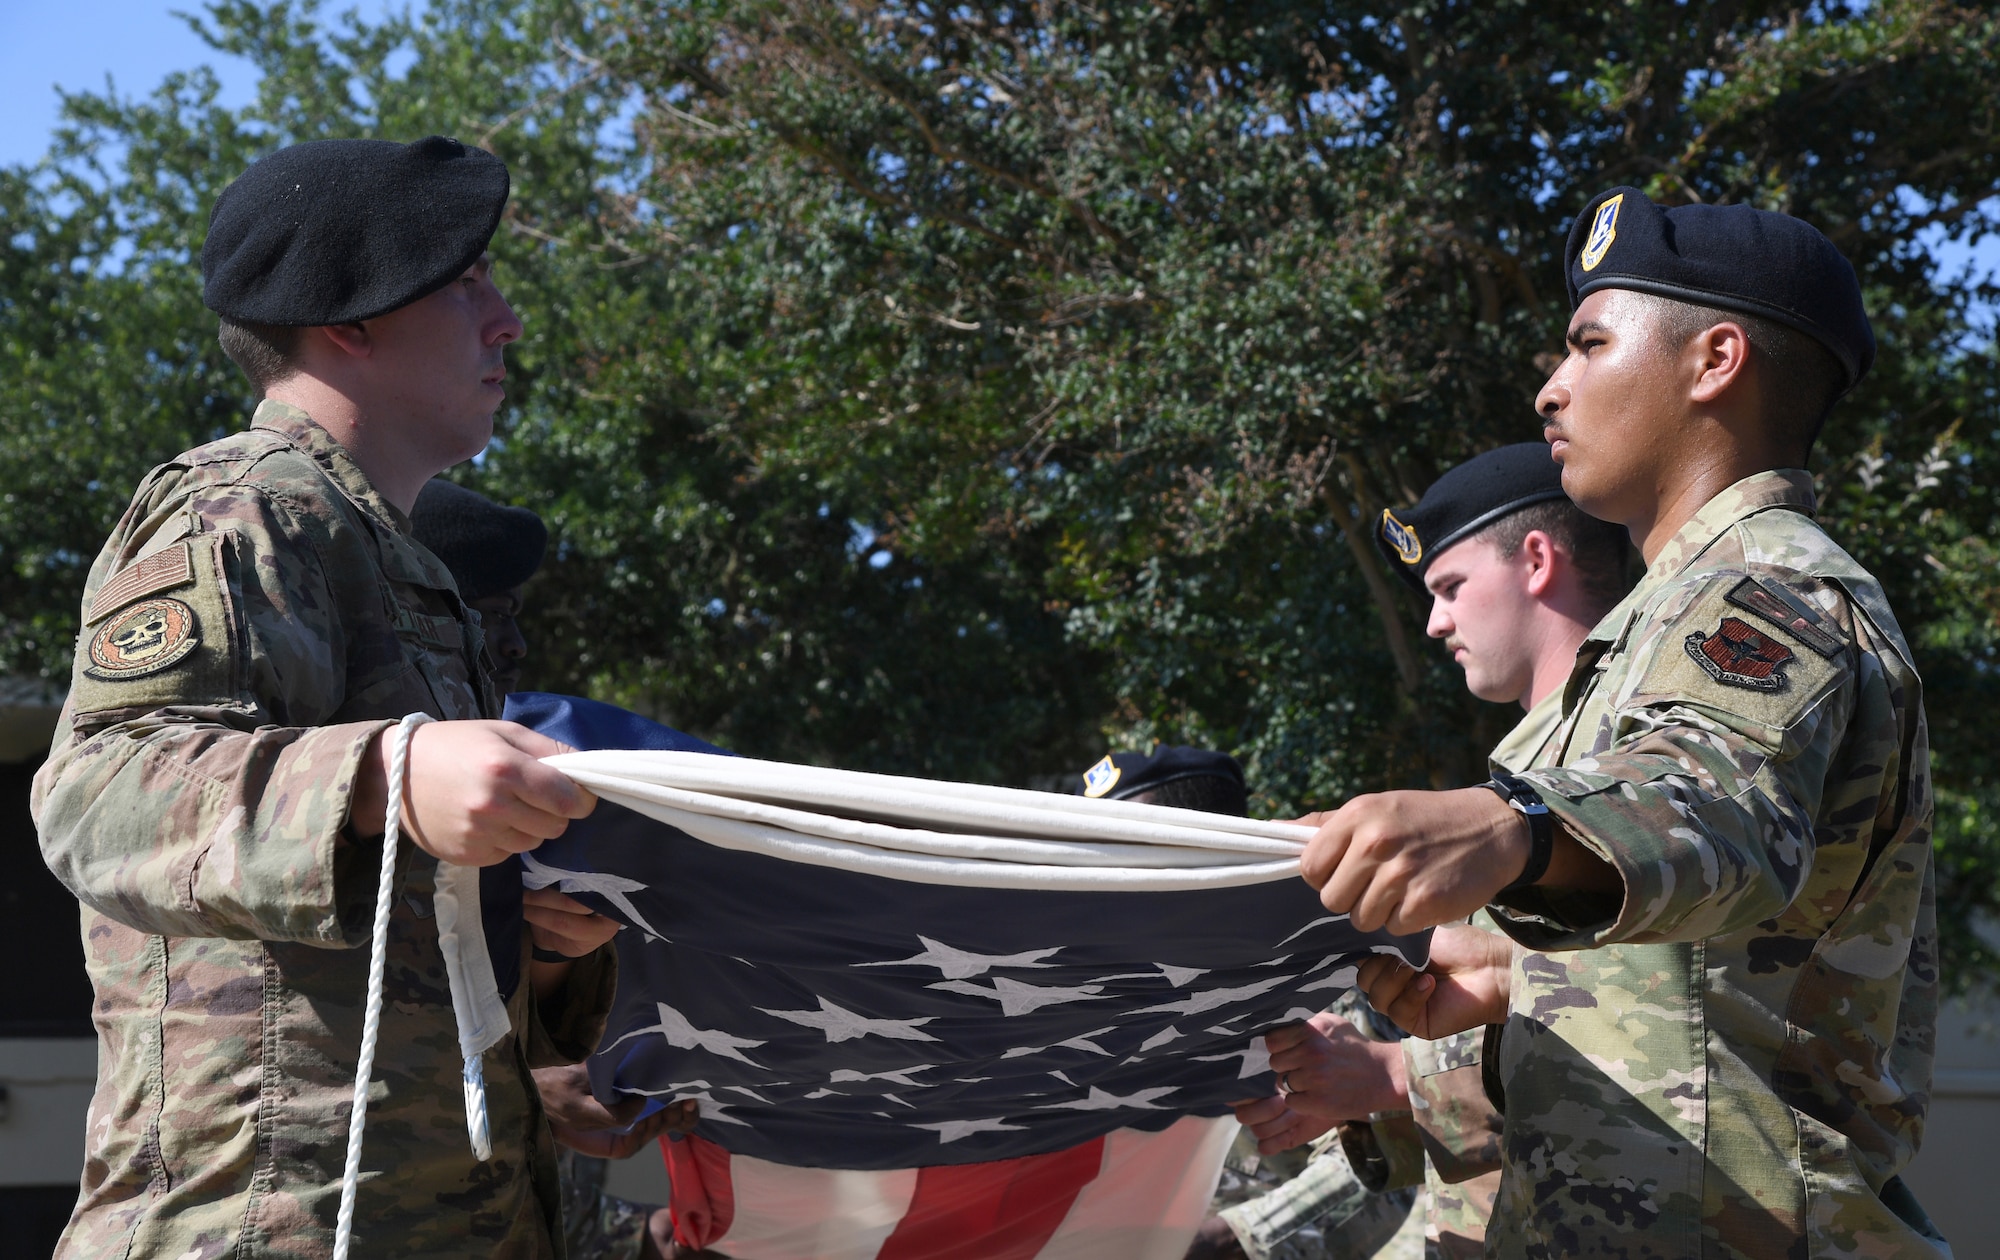 Members of the 81st Security Forces Squadron participate in a retreat ceremony at Keesler Air Force Base, Mississippi, May 20, 2022. The ceremony, hosted by the 81st SFS, was the last of several events held in celebration of this year's Police Week. (U.S. Air Force photo by Kemberly Groue)